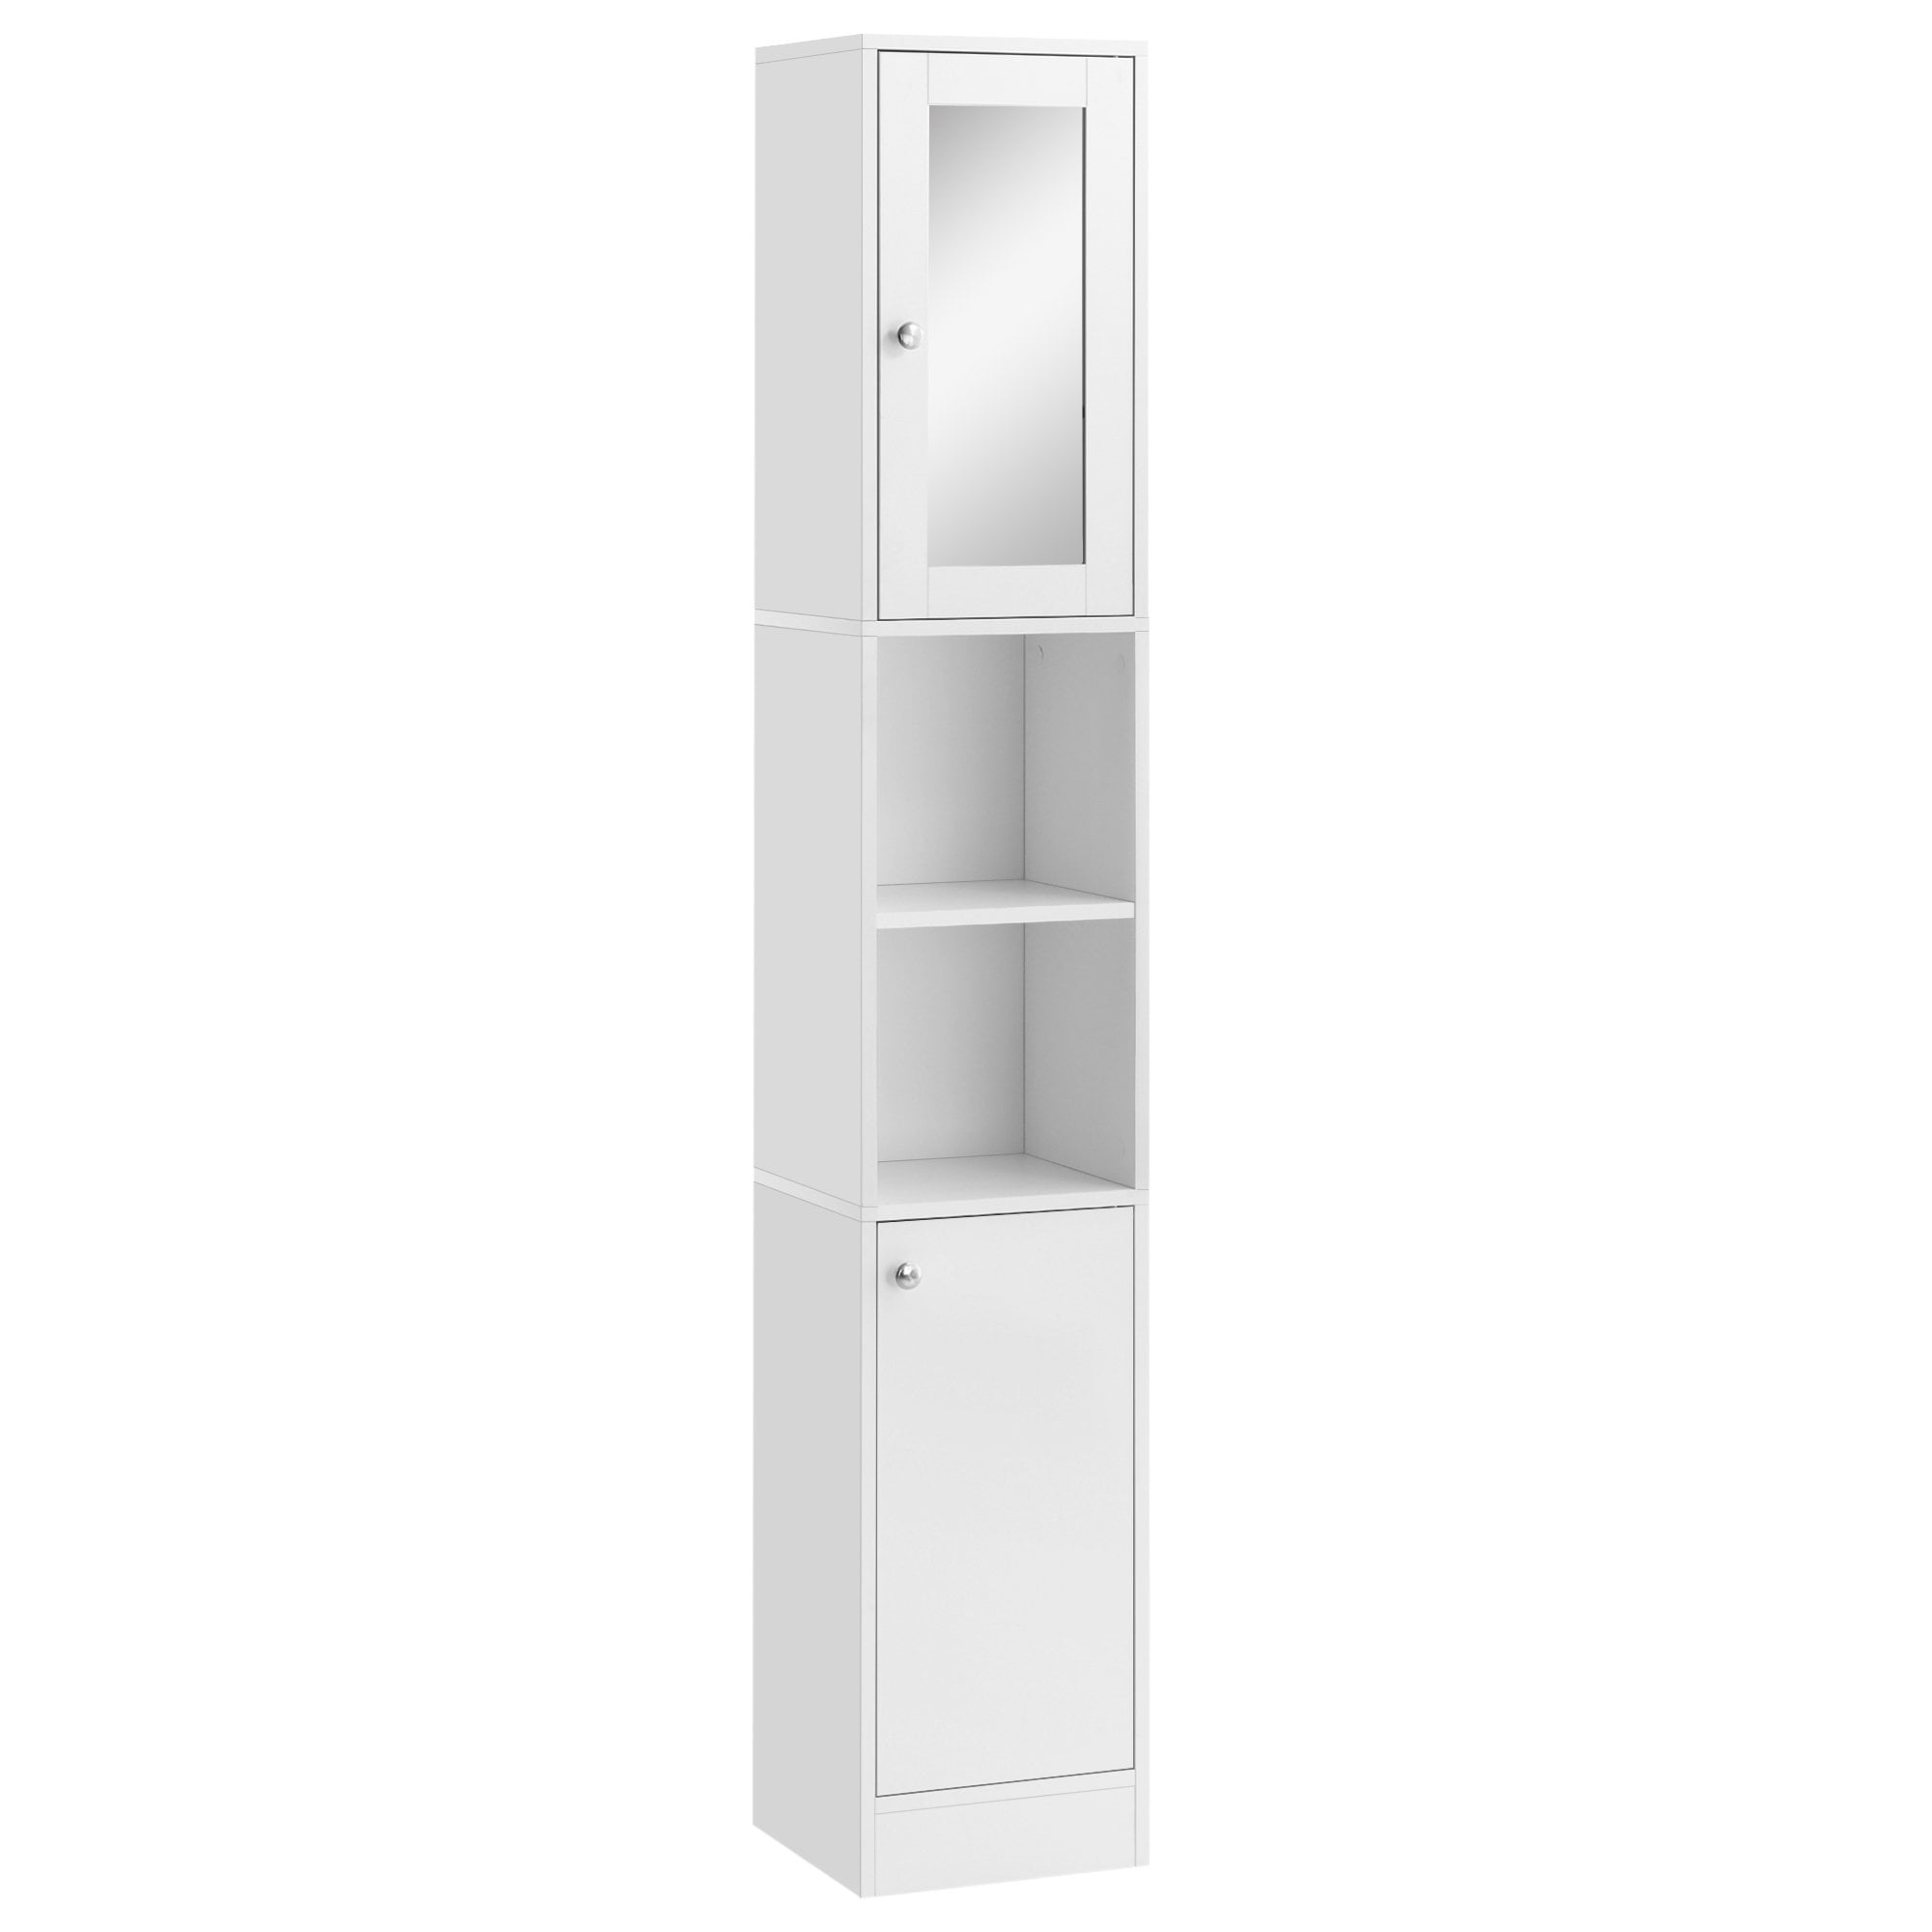 Tall Bathroom Storage Cabinet with Mirror - Freestanding Floor Cabinet Tallboy Unit with Adjustable Shelves - White and - Home Living  | TJ Hughes